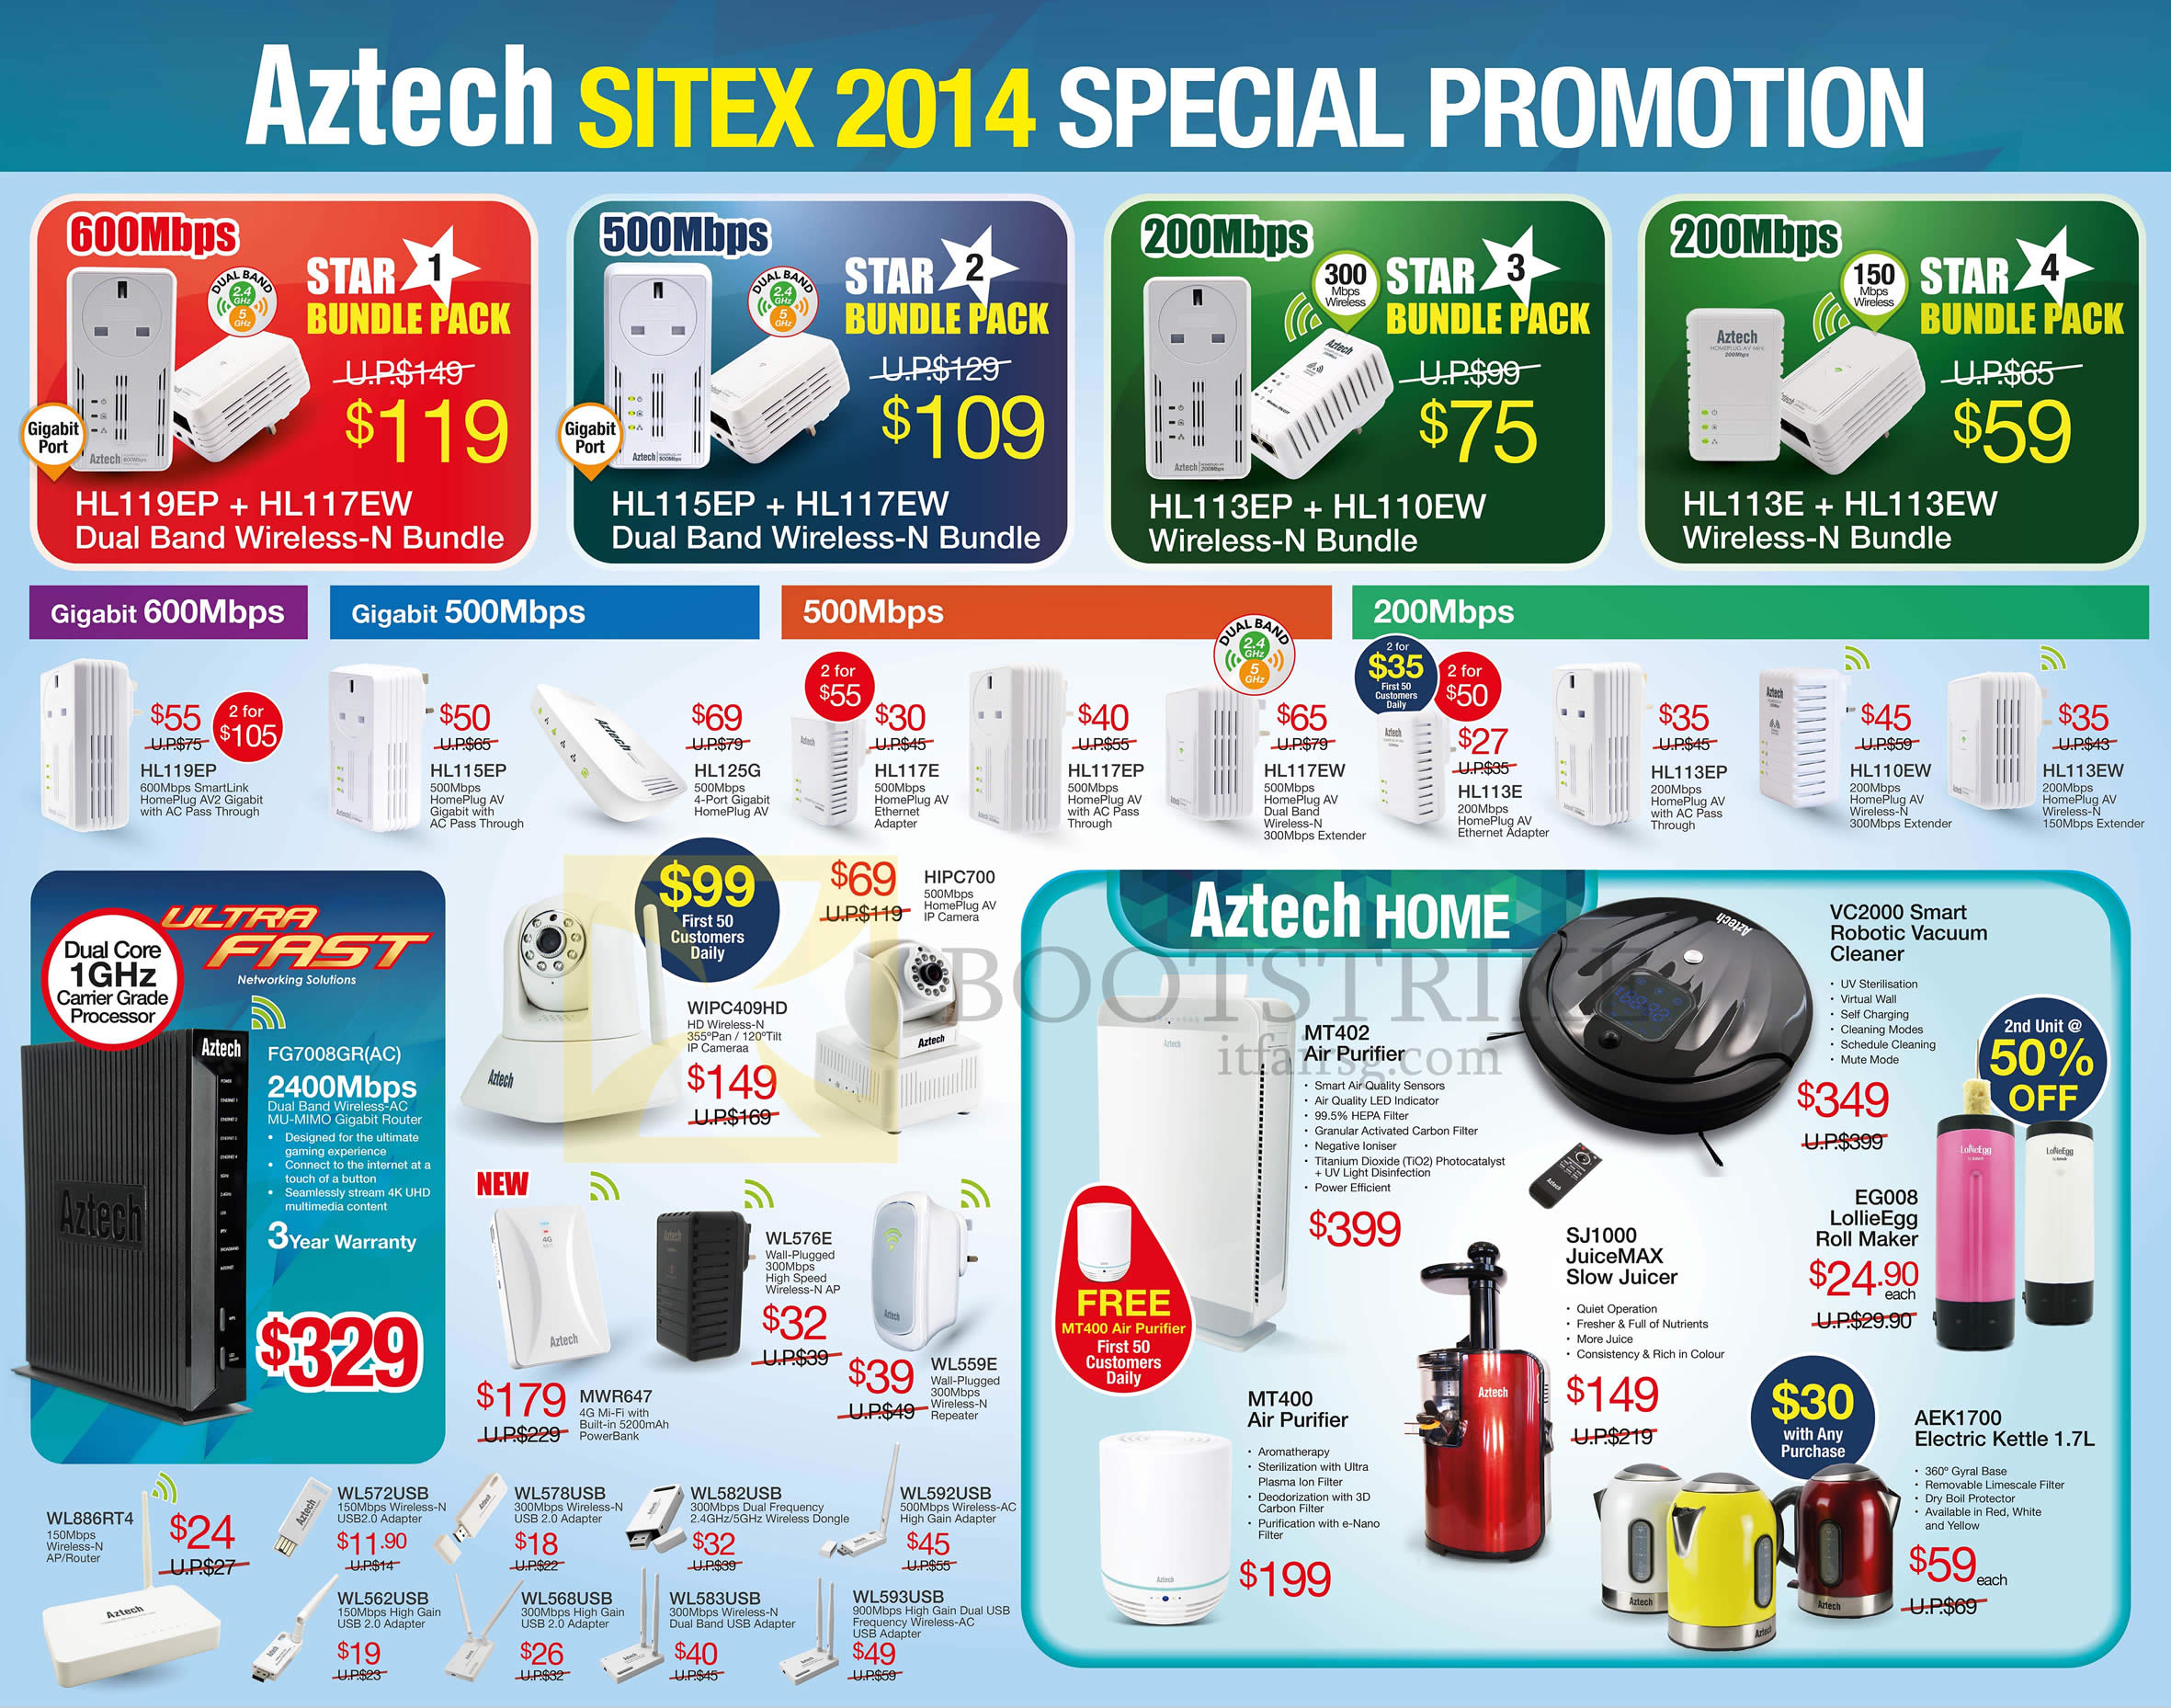 SITEX 2014 price list image brochure of Aztech Networking Wireless-N Bundles, Juicer, Air Purifiers, Electric Kettles, Vacuum Cleaner, 600Mbps, 500Mbps, 200Mbps, Gigabit 600Mbps, Gigabit 500Mbps